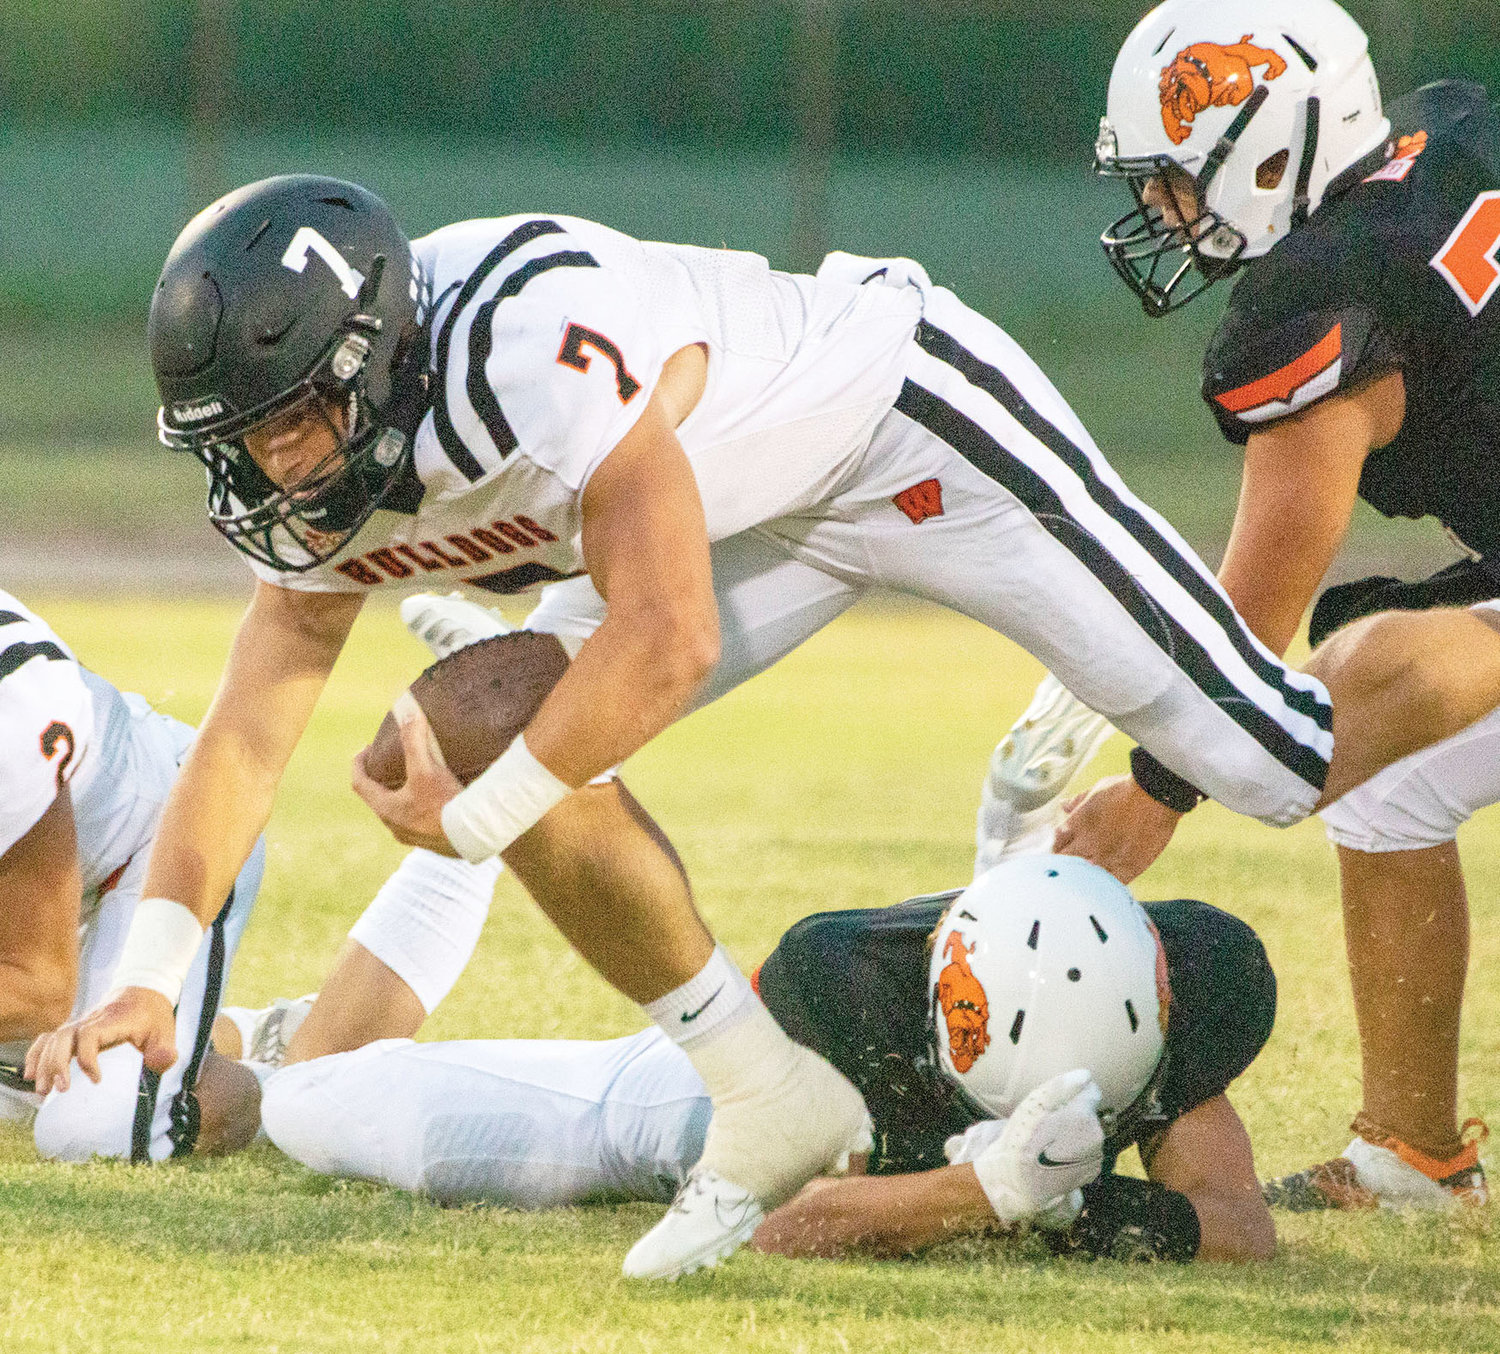 Wayne senior Ethan Mullins carries the ball for the Bulldogs. Mullins and the the Bulldogs were knocked out of the Playoffs by Tonkawa after a 27-0 defeat.